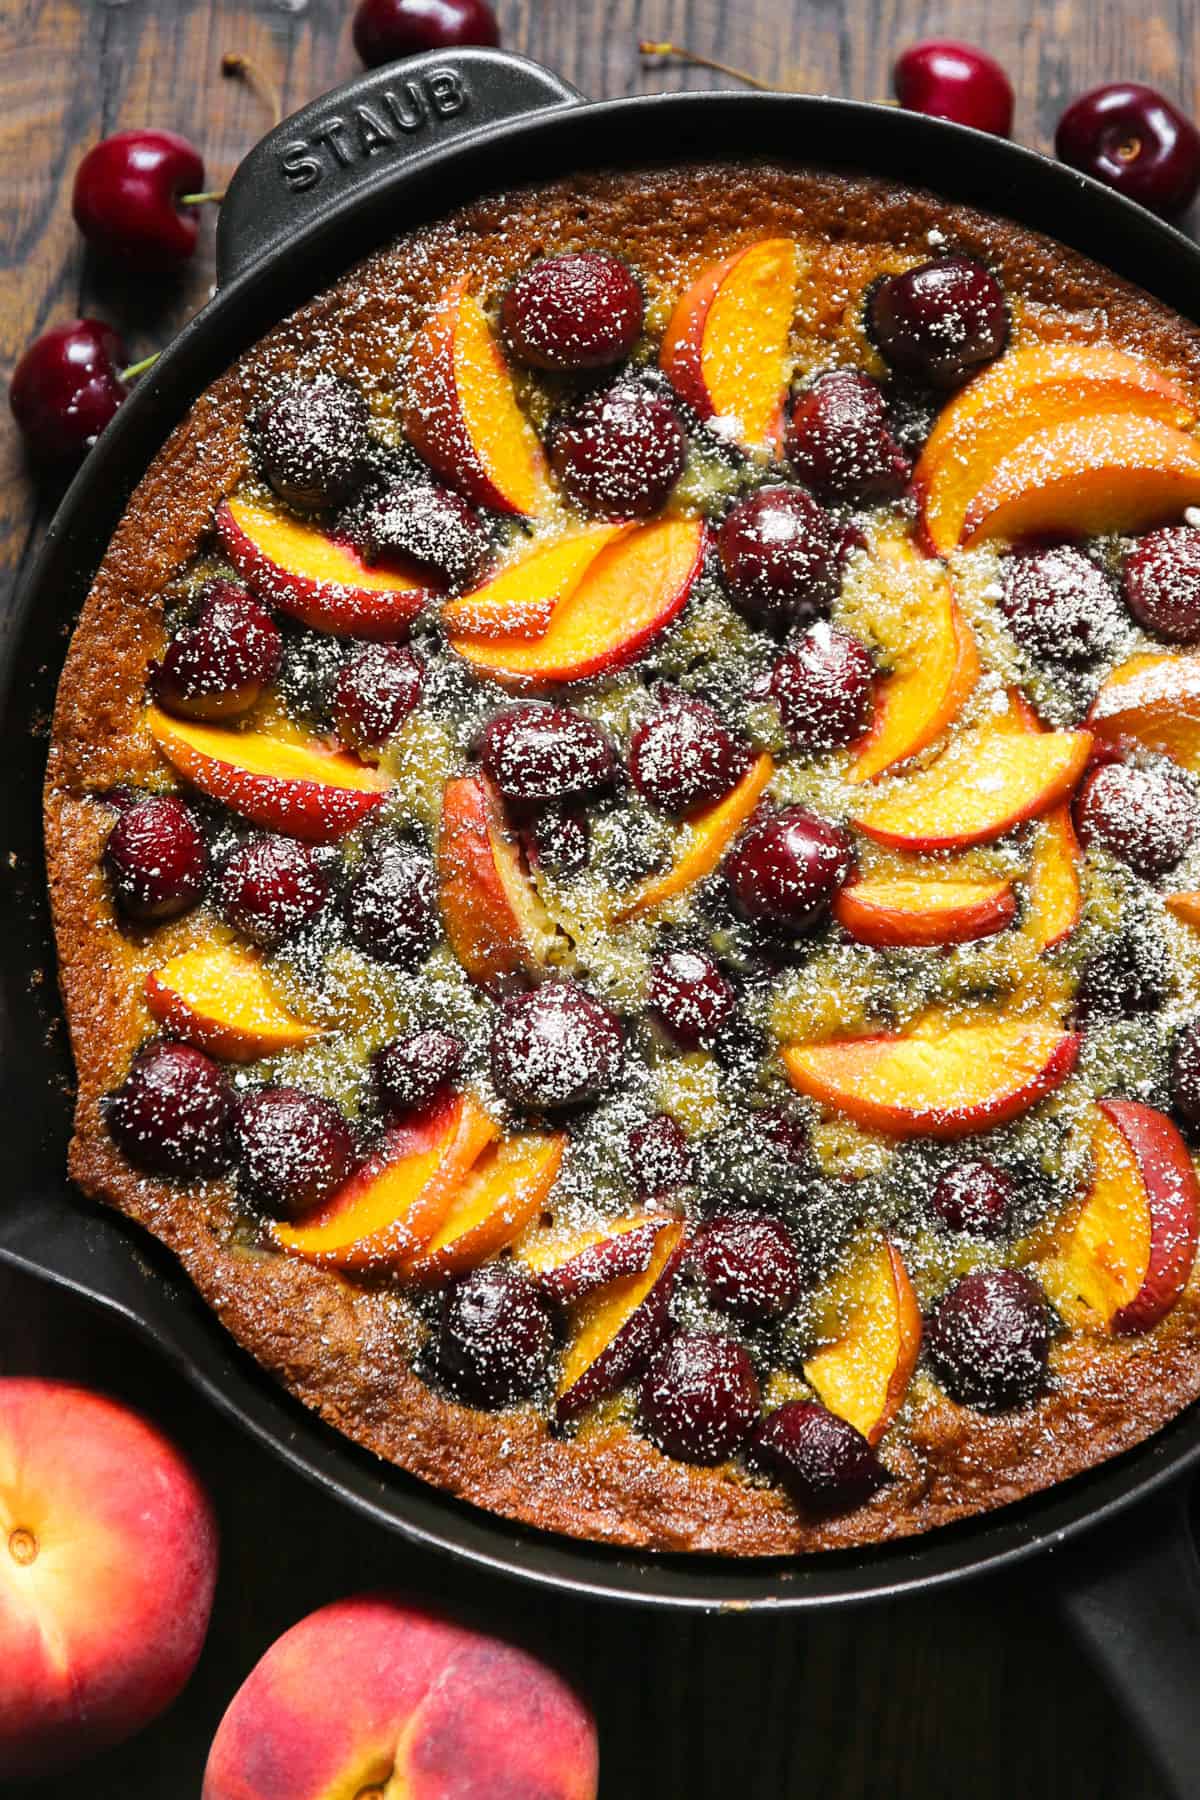 Stone Fruit Cake with Cherries and Peaches - in a cast iron skillet.